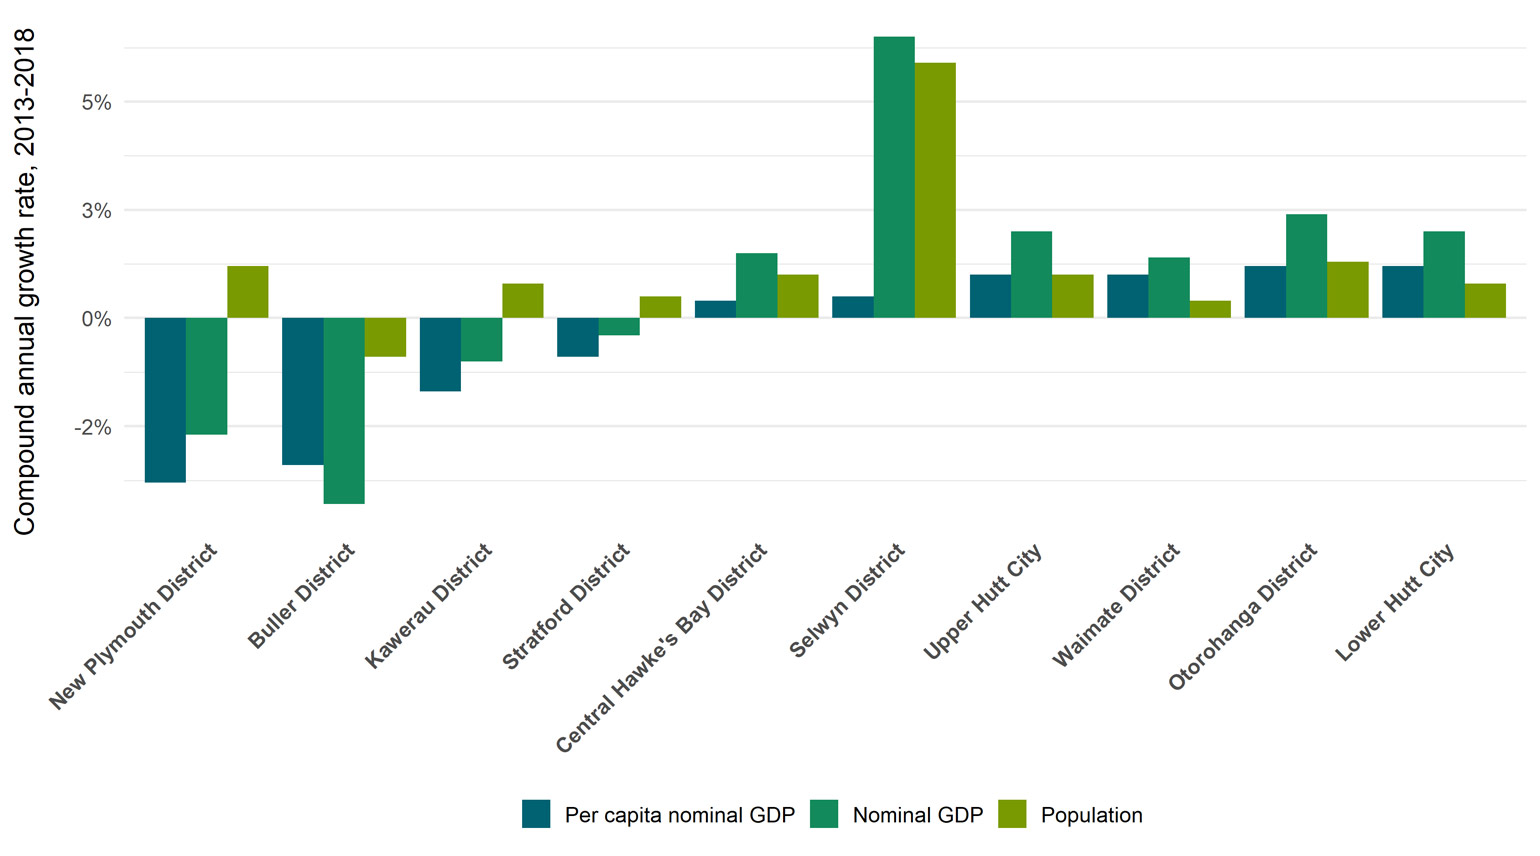 Chart showing the five year compound annual growth rate (2013 to 2018) in nominal GDP per capita, nominal GDP, and population. 